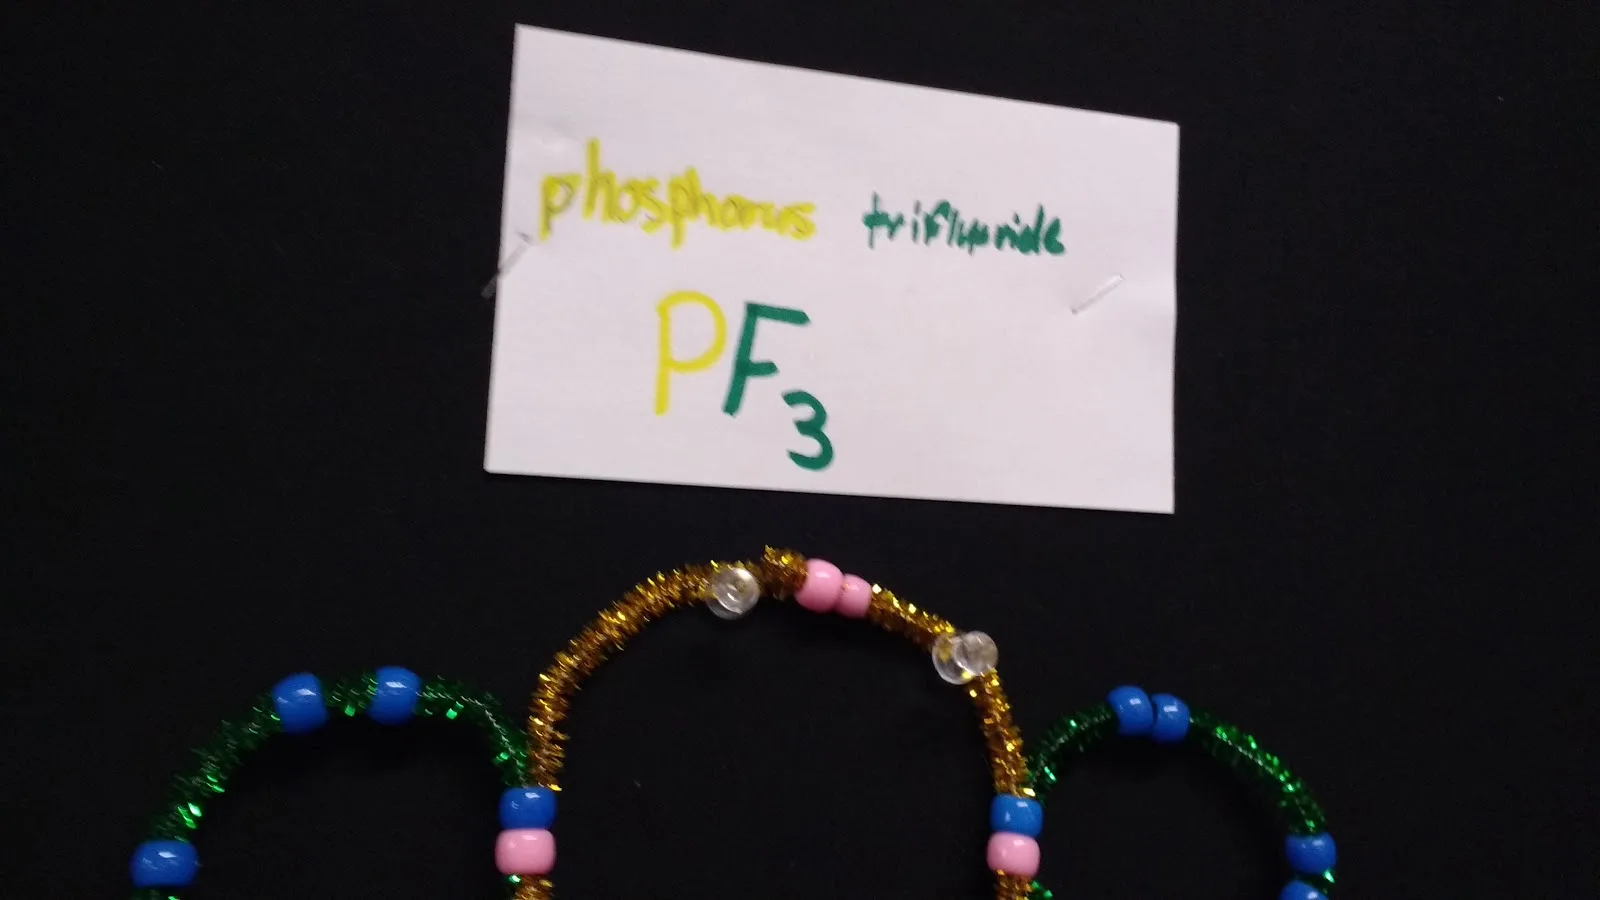 Science Chemistry Bulletin Board - Covalent Compounds Made from Pipe Cleaners and Pony Beads